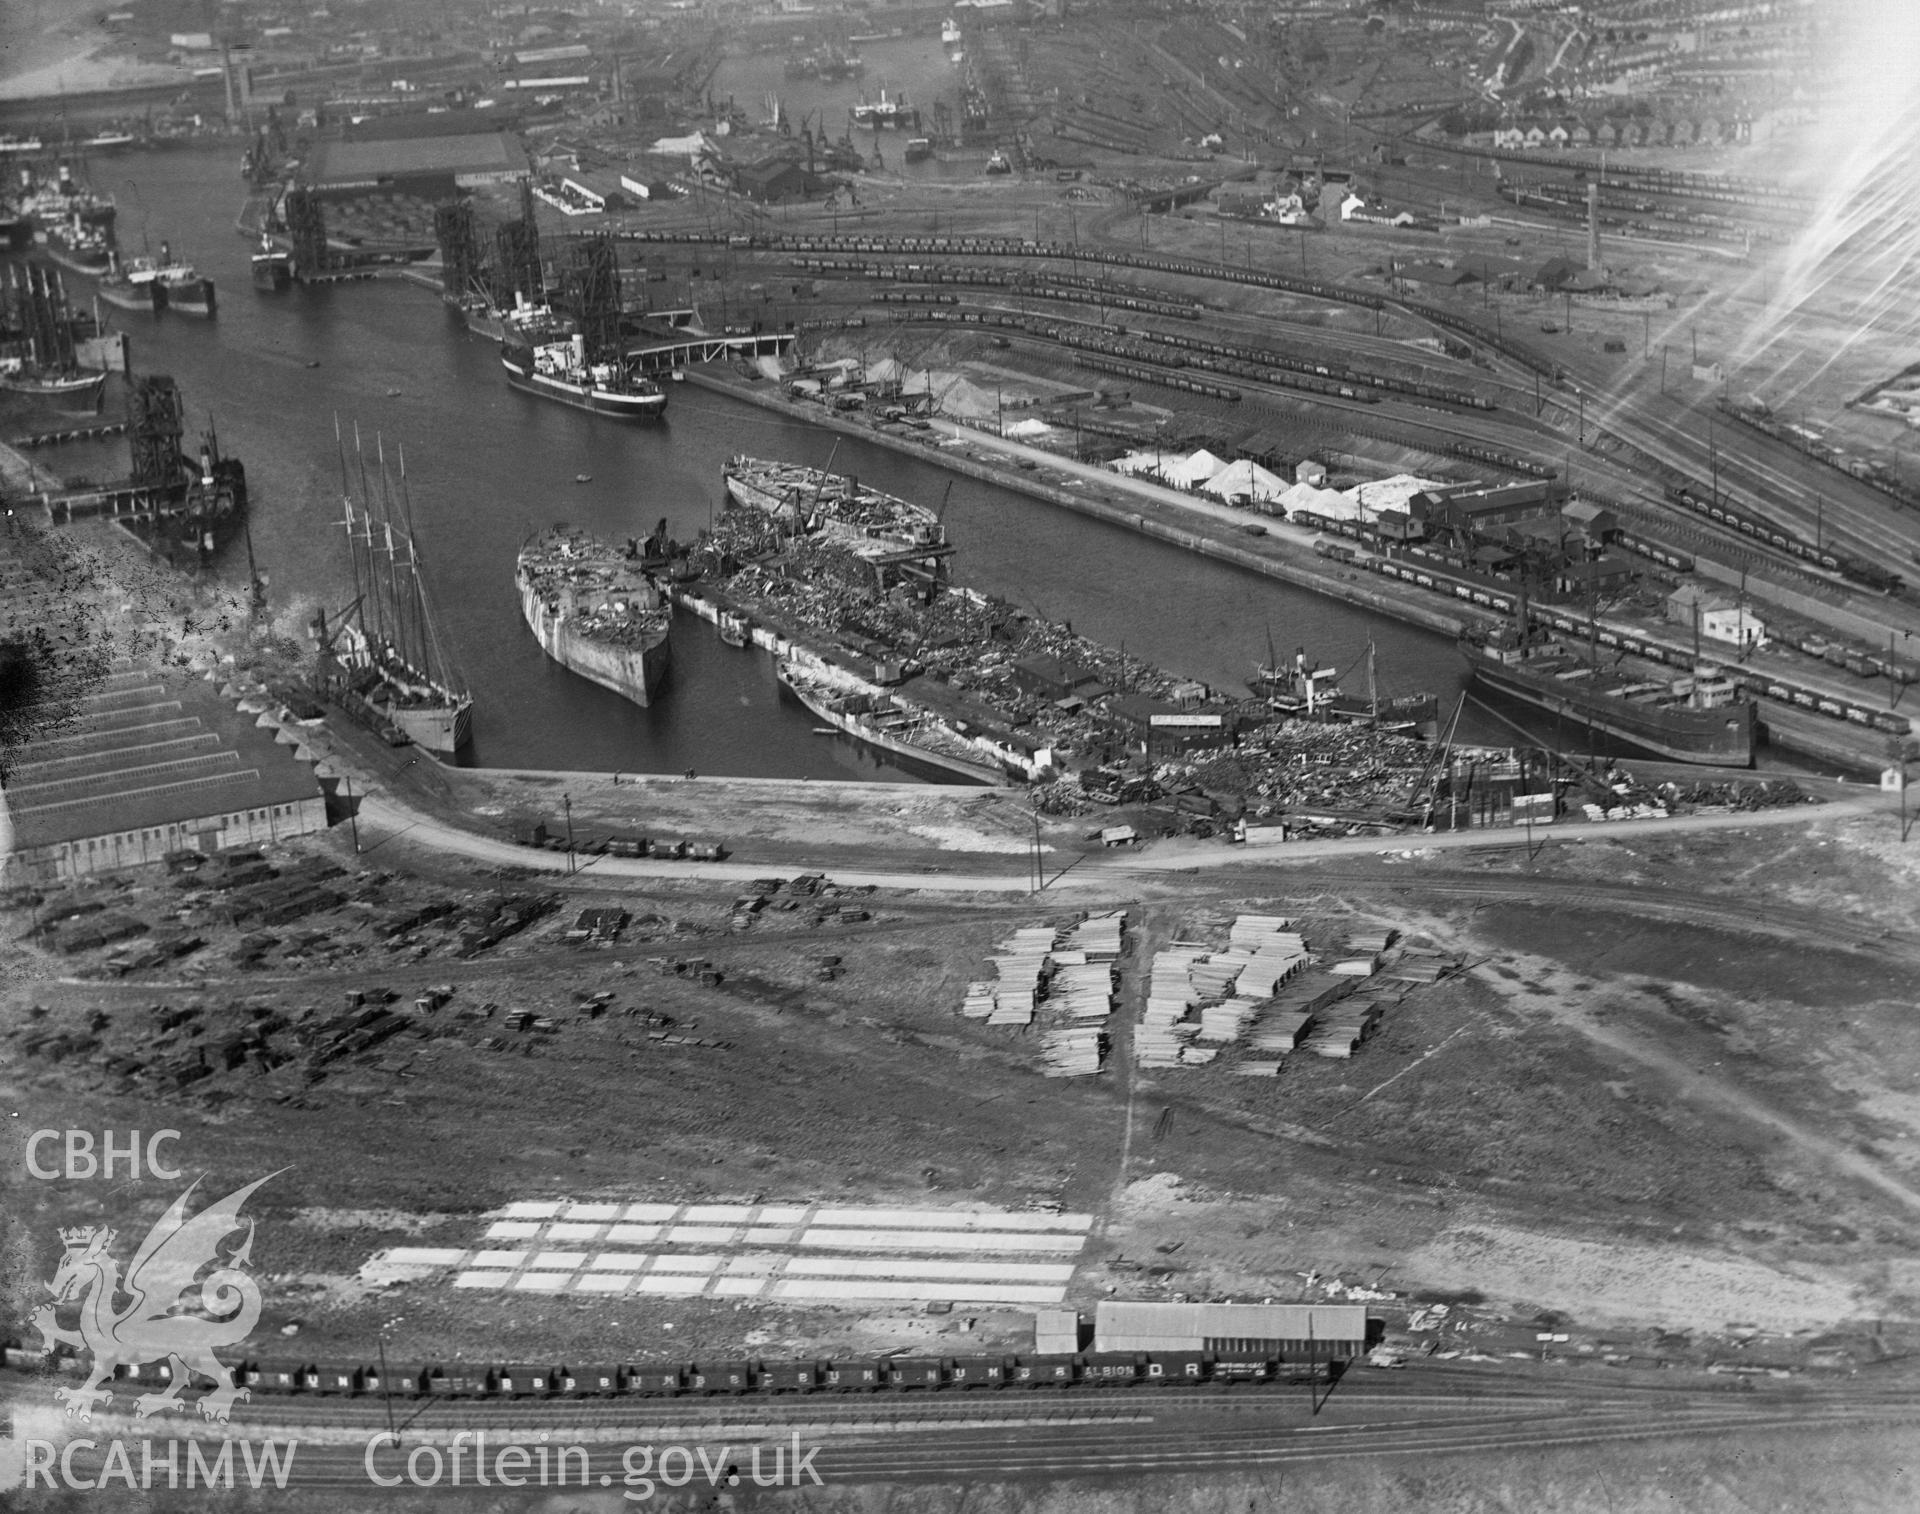 Black and white oblique aerial photograph showing Swansea Docks, from Aerofilms album Swansea (W30), taken by Aerofilms Ltd and dated 1921.